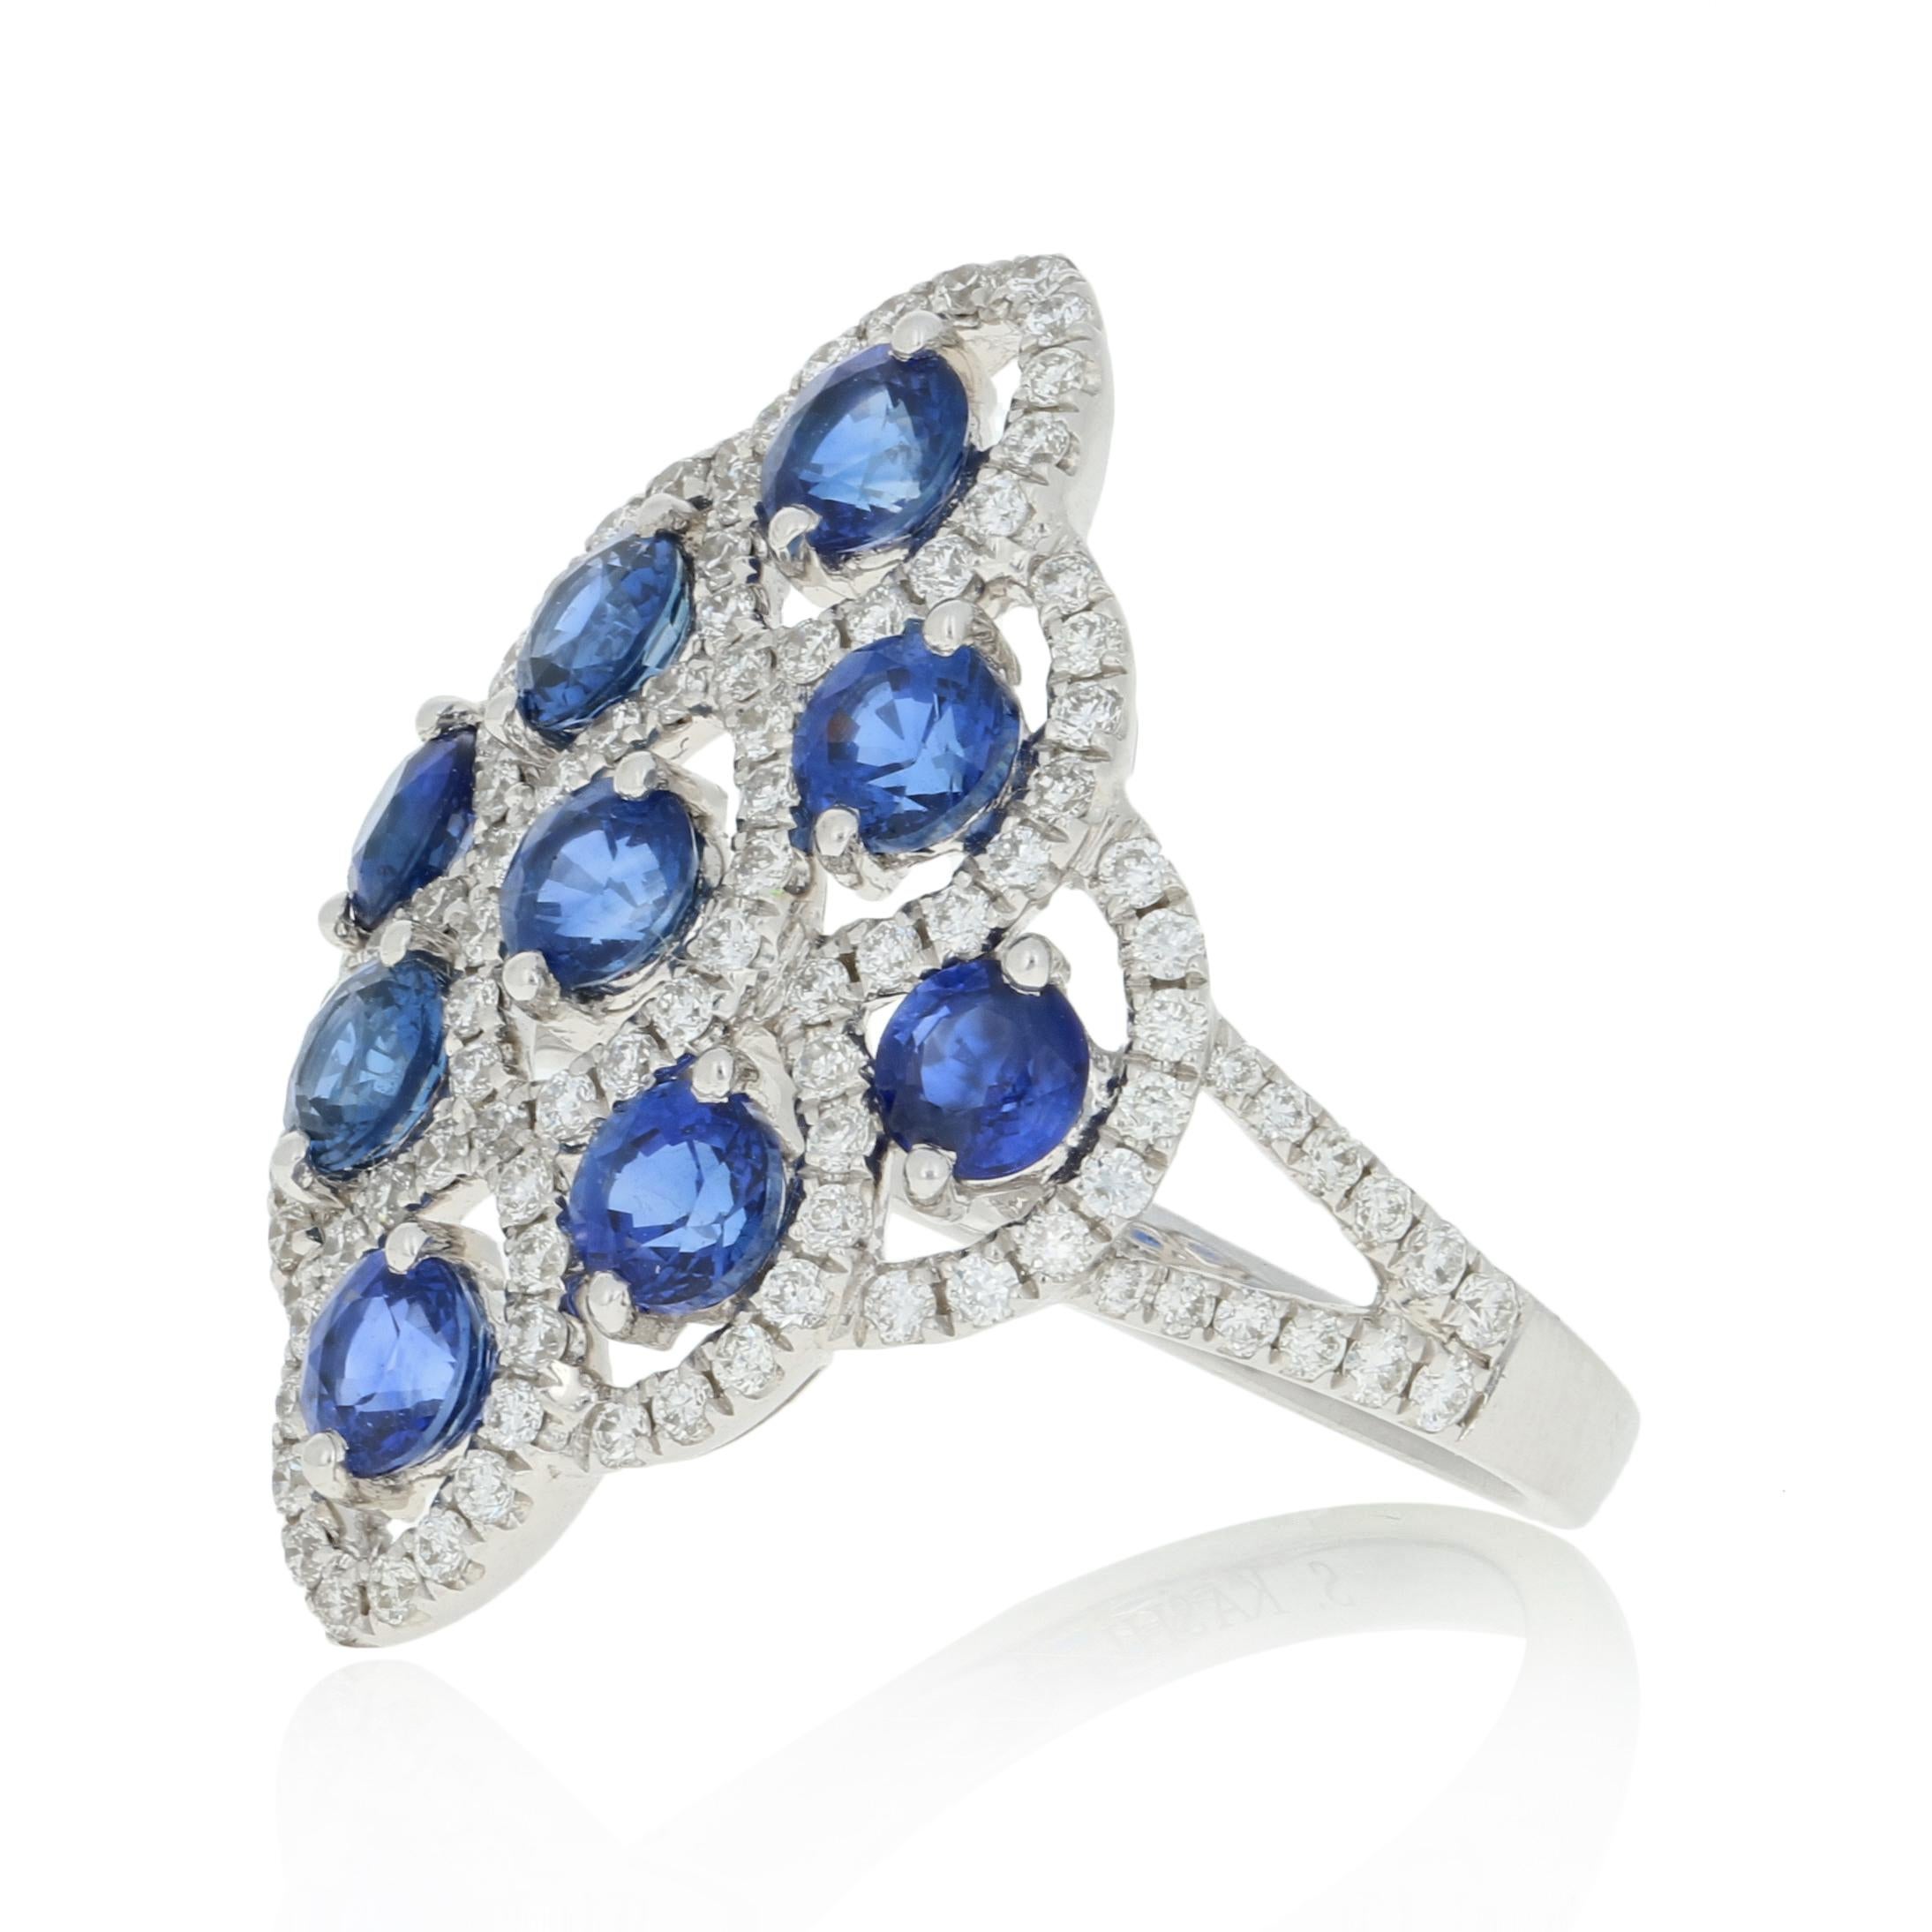 Graceful elegance defined! Artistically created in 14k white gold, this spectacular NEW halo-inspired ring features silky blue sapphires outlined by icy white diamonds.  

This ring is a size 6. Please contact us for a quote on re-sizing this ring.